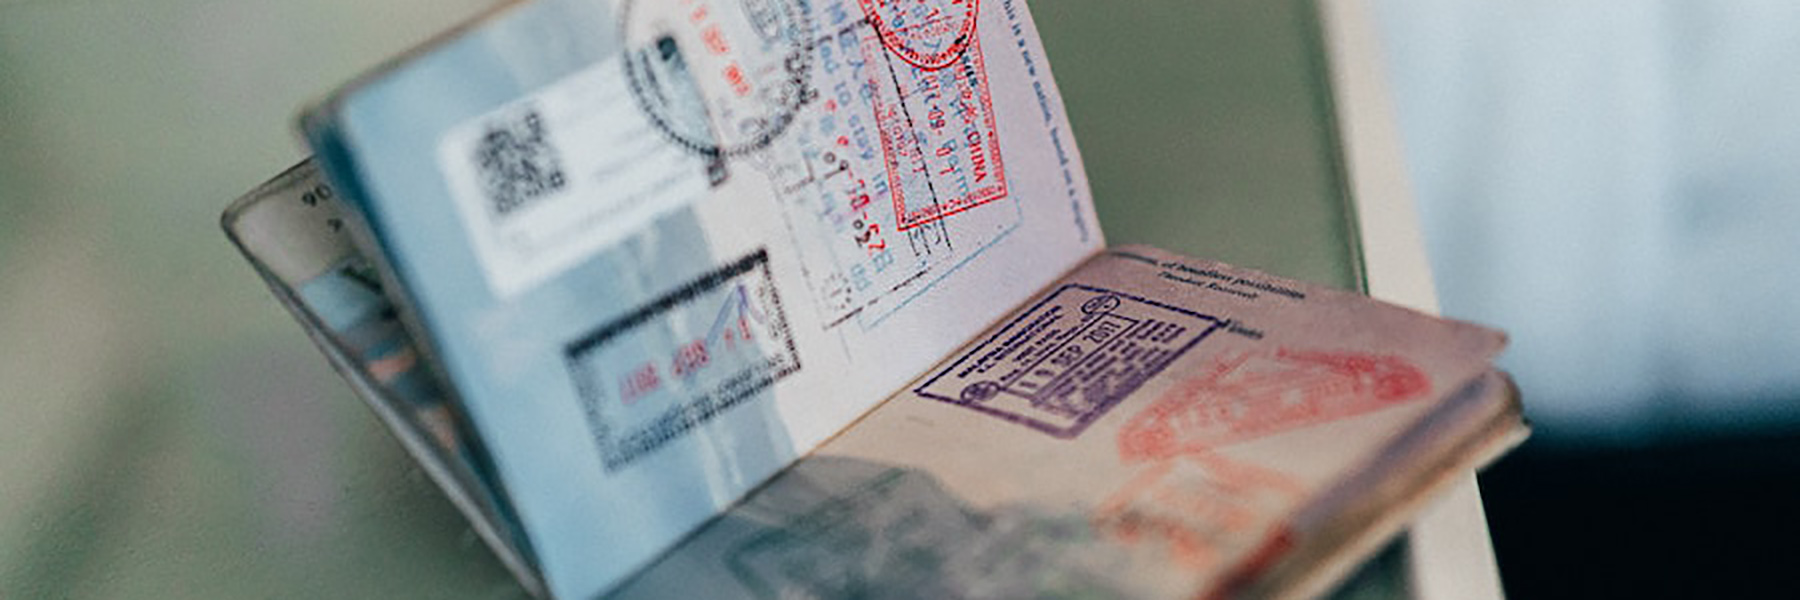 featured image shows a travel passport